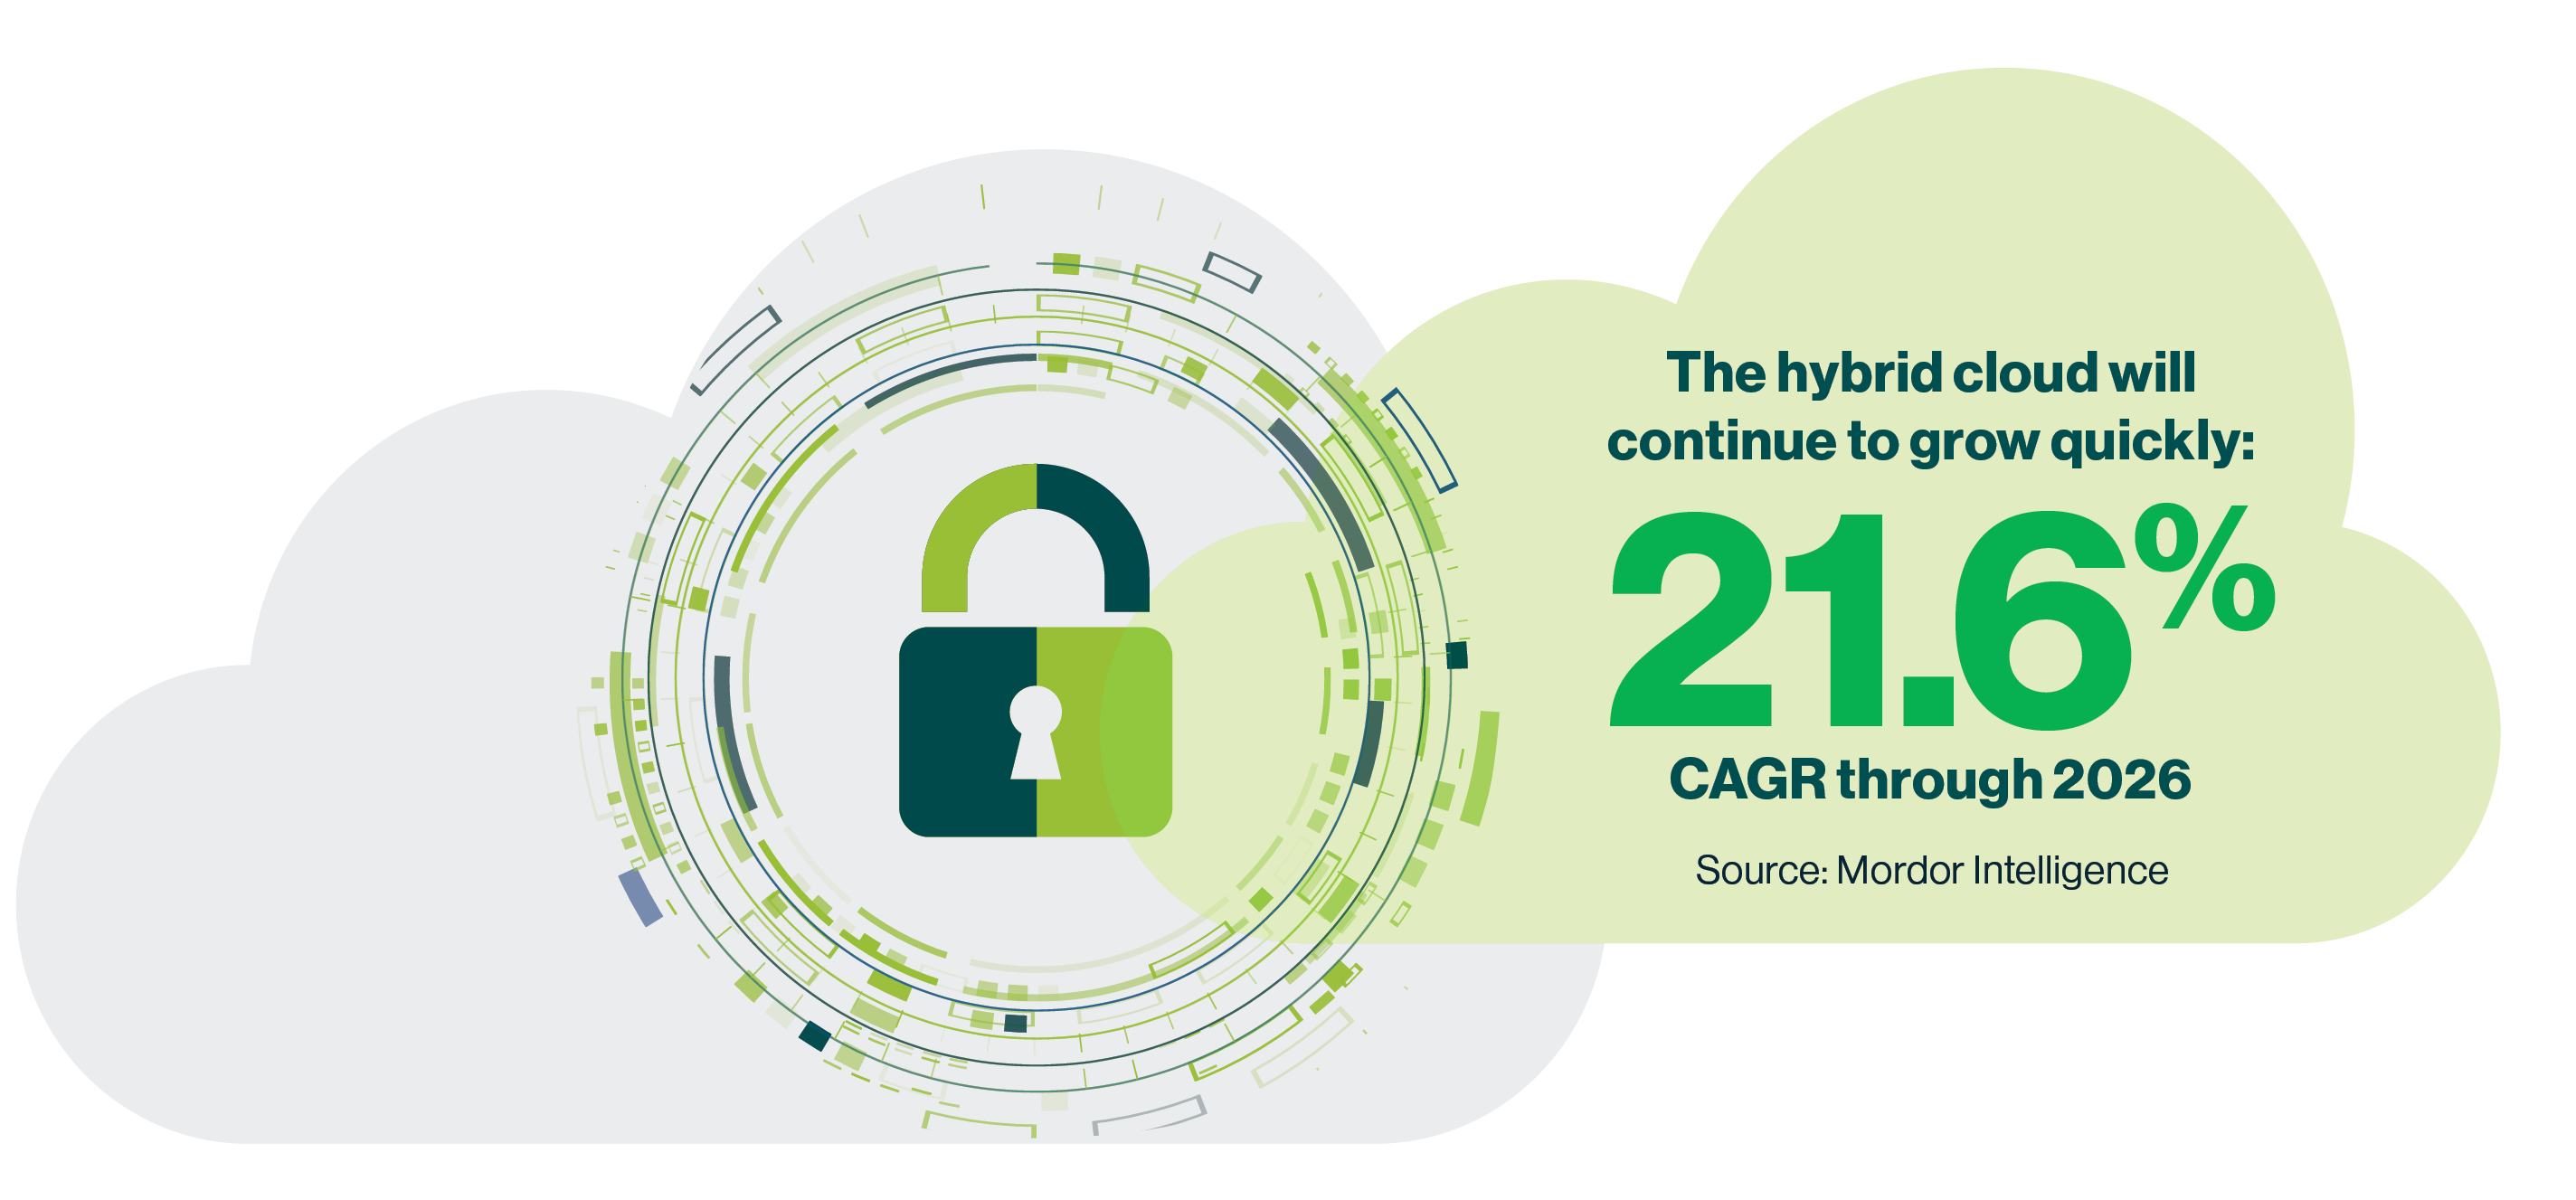 Hybrid cloud wins rely on data protection